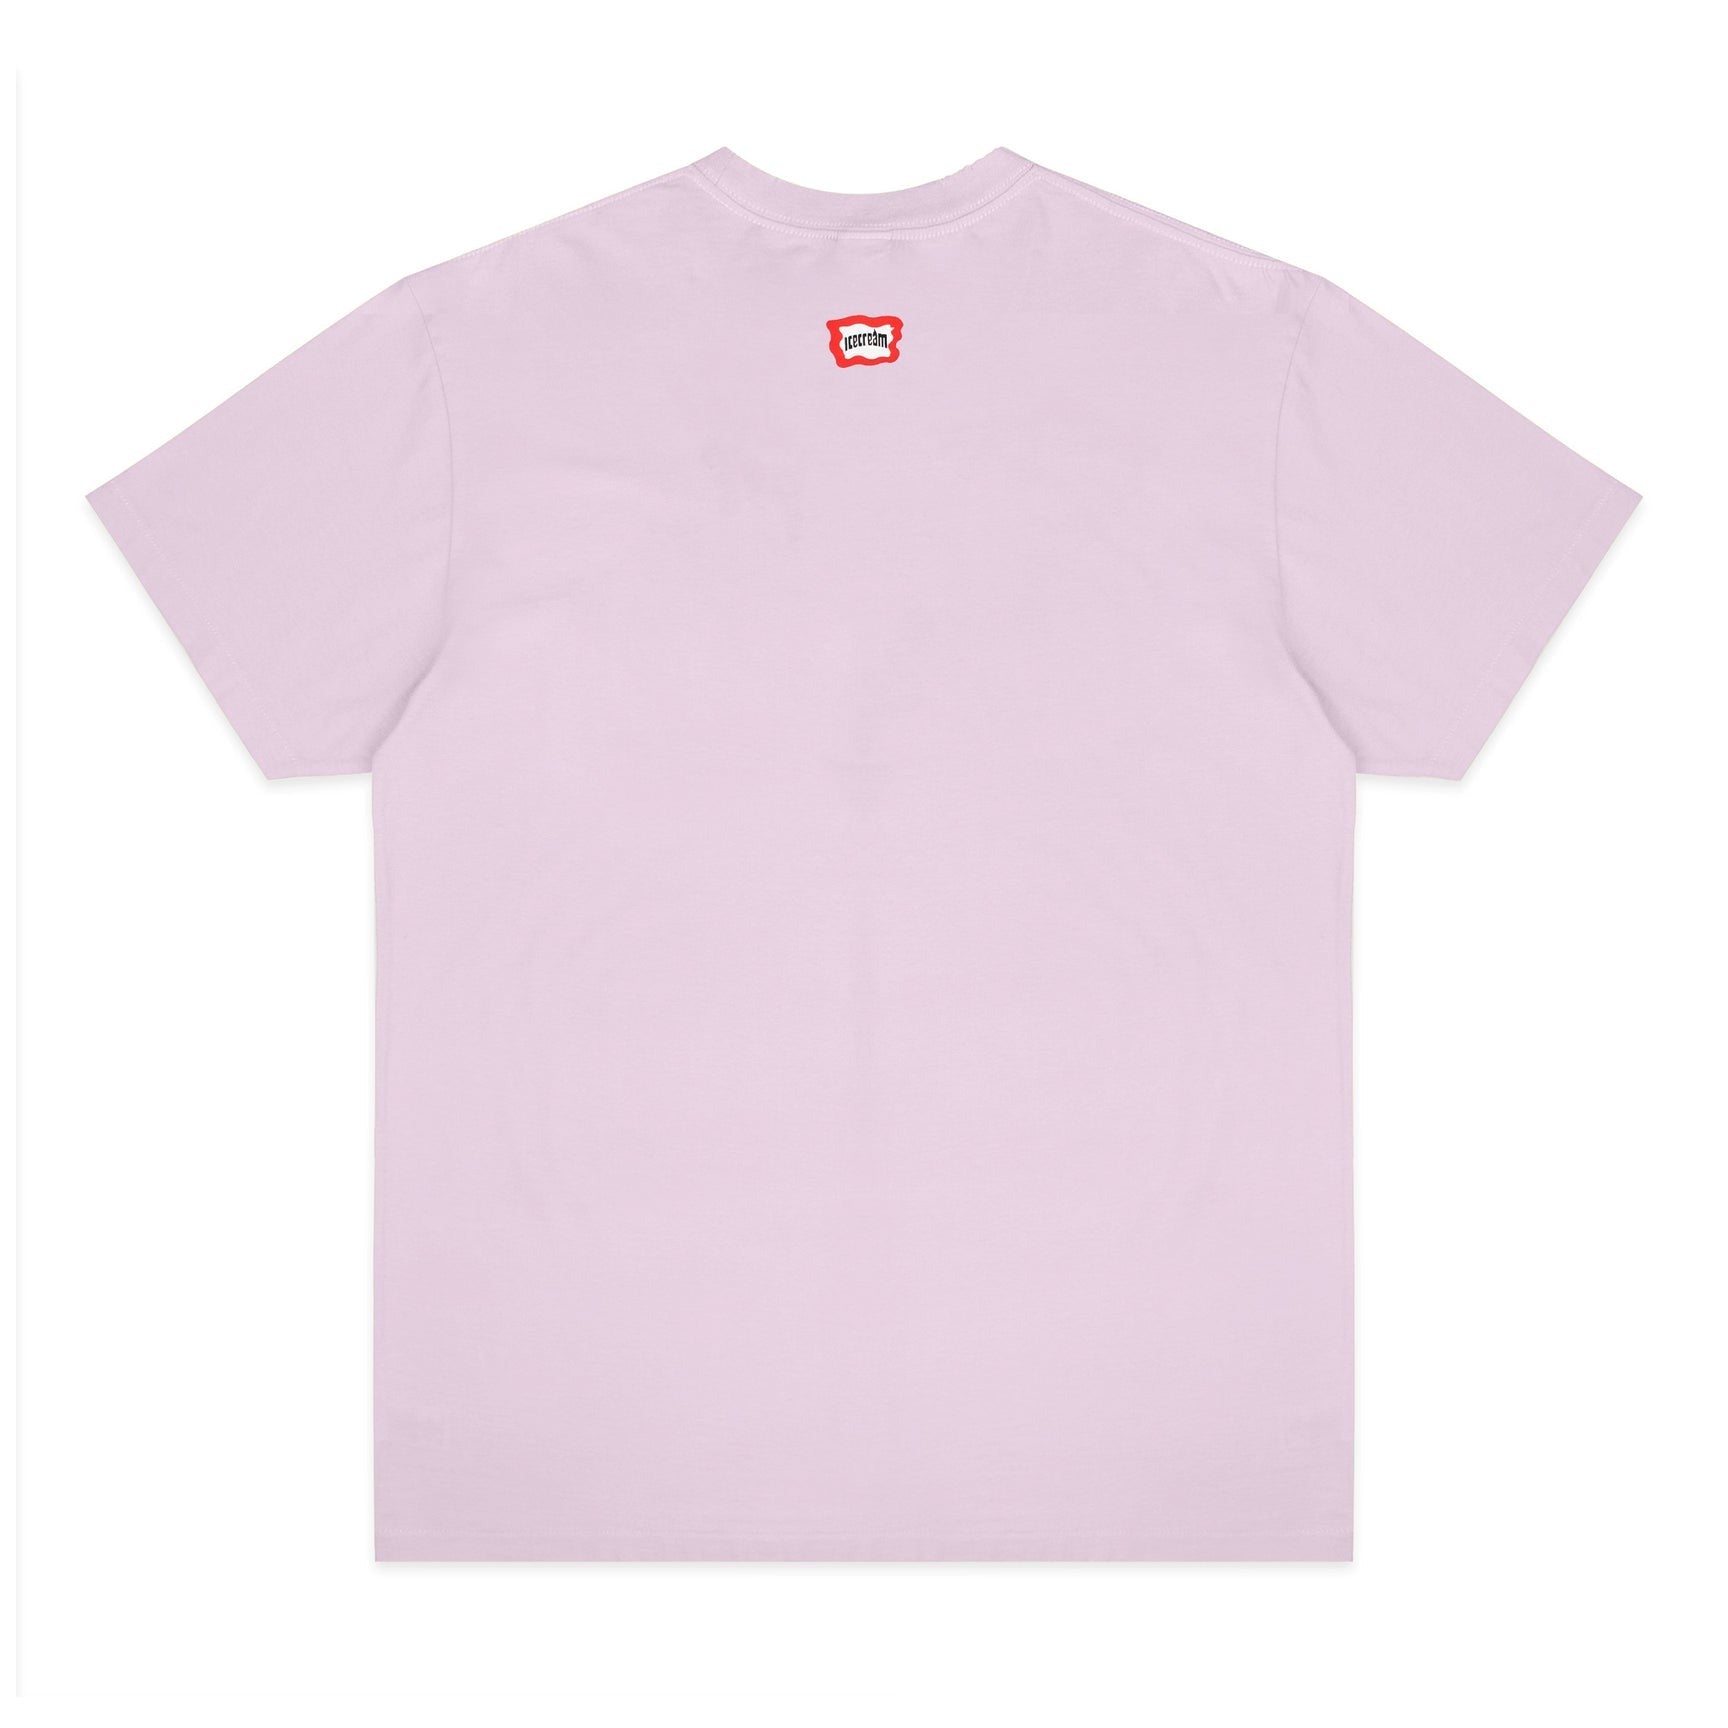 PASTEL SS TEE - LAVENDER FROST